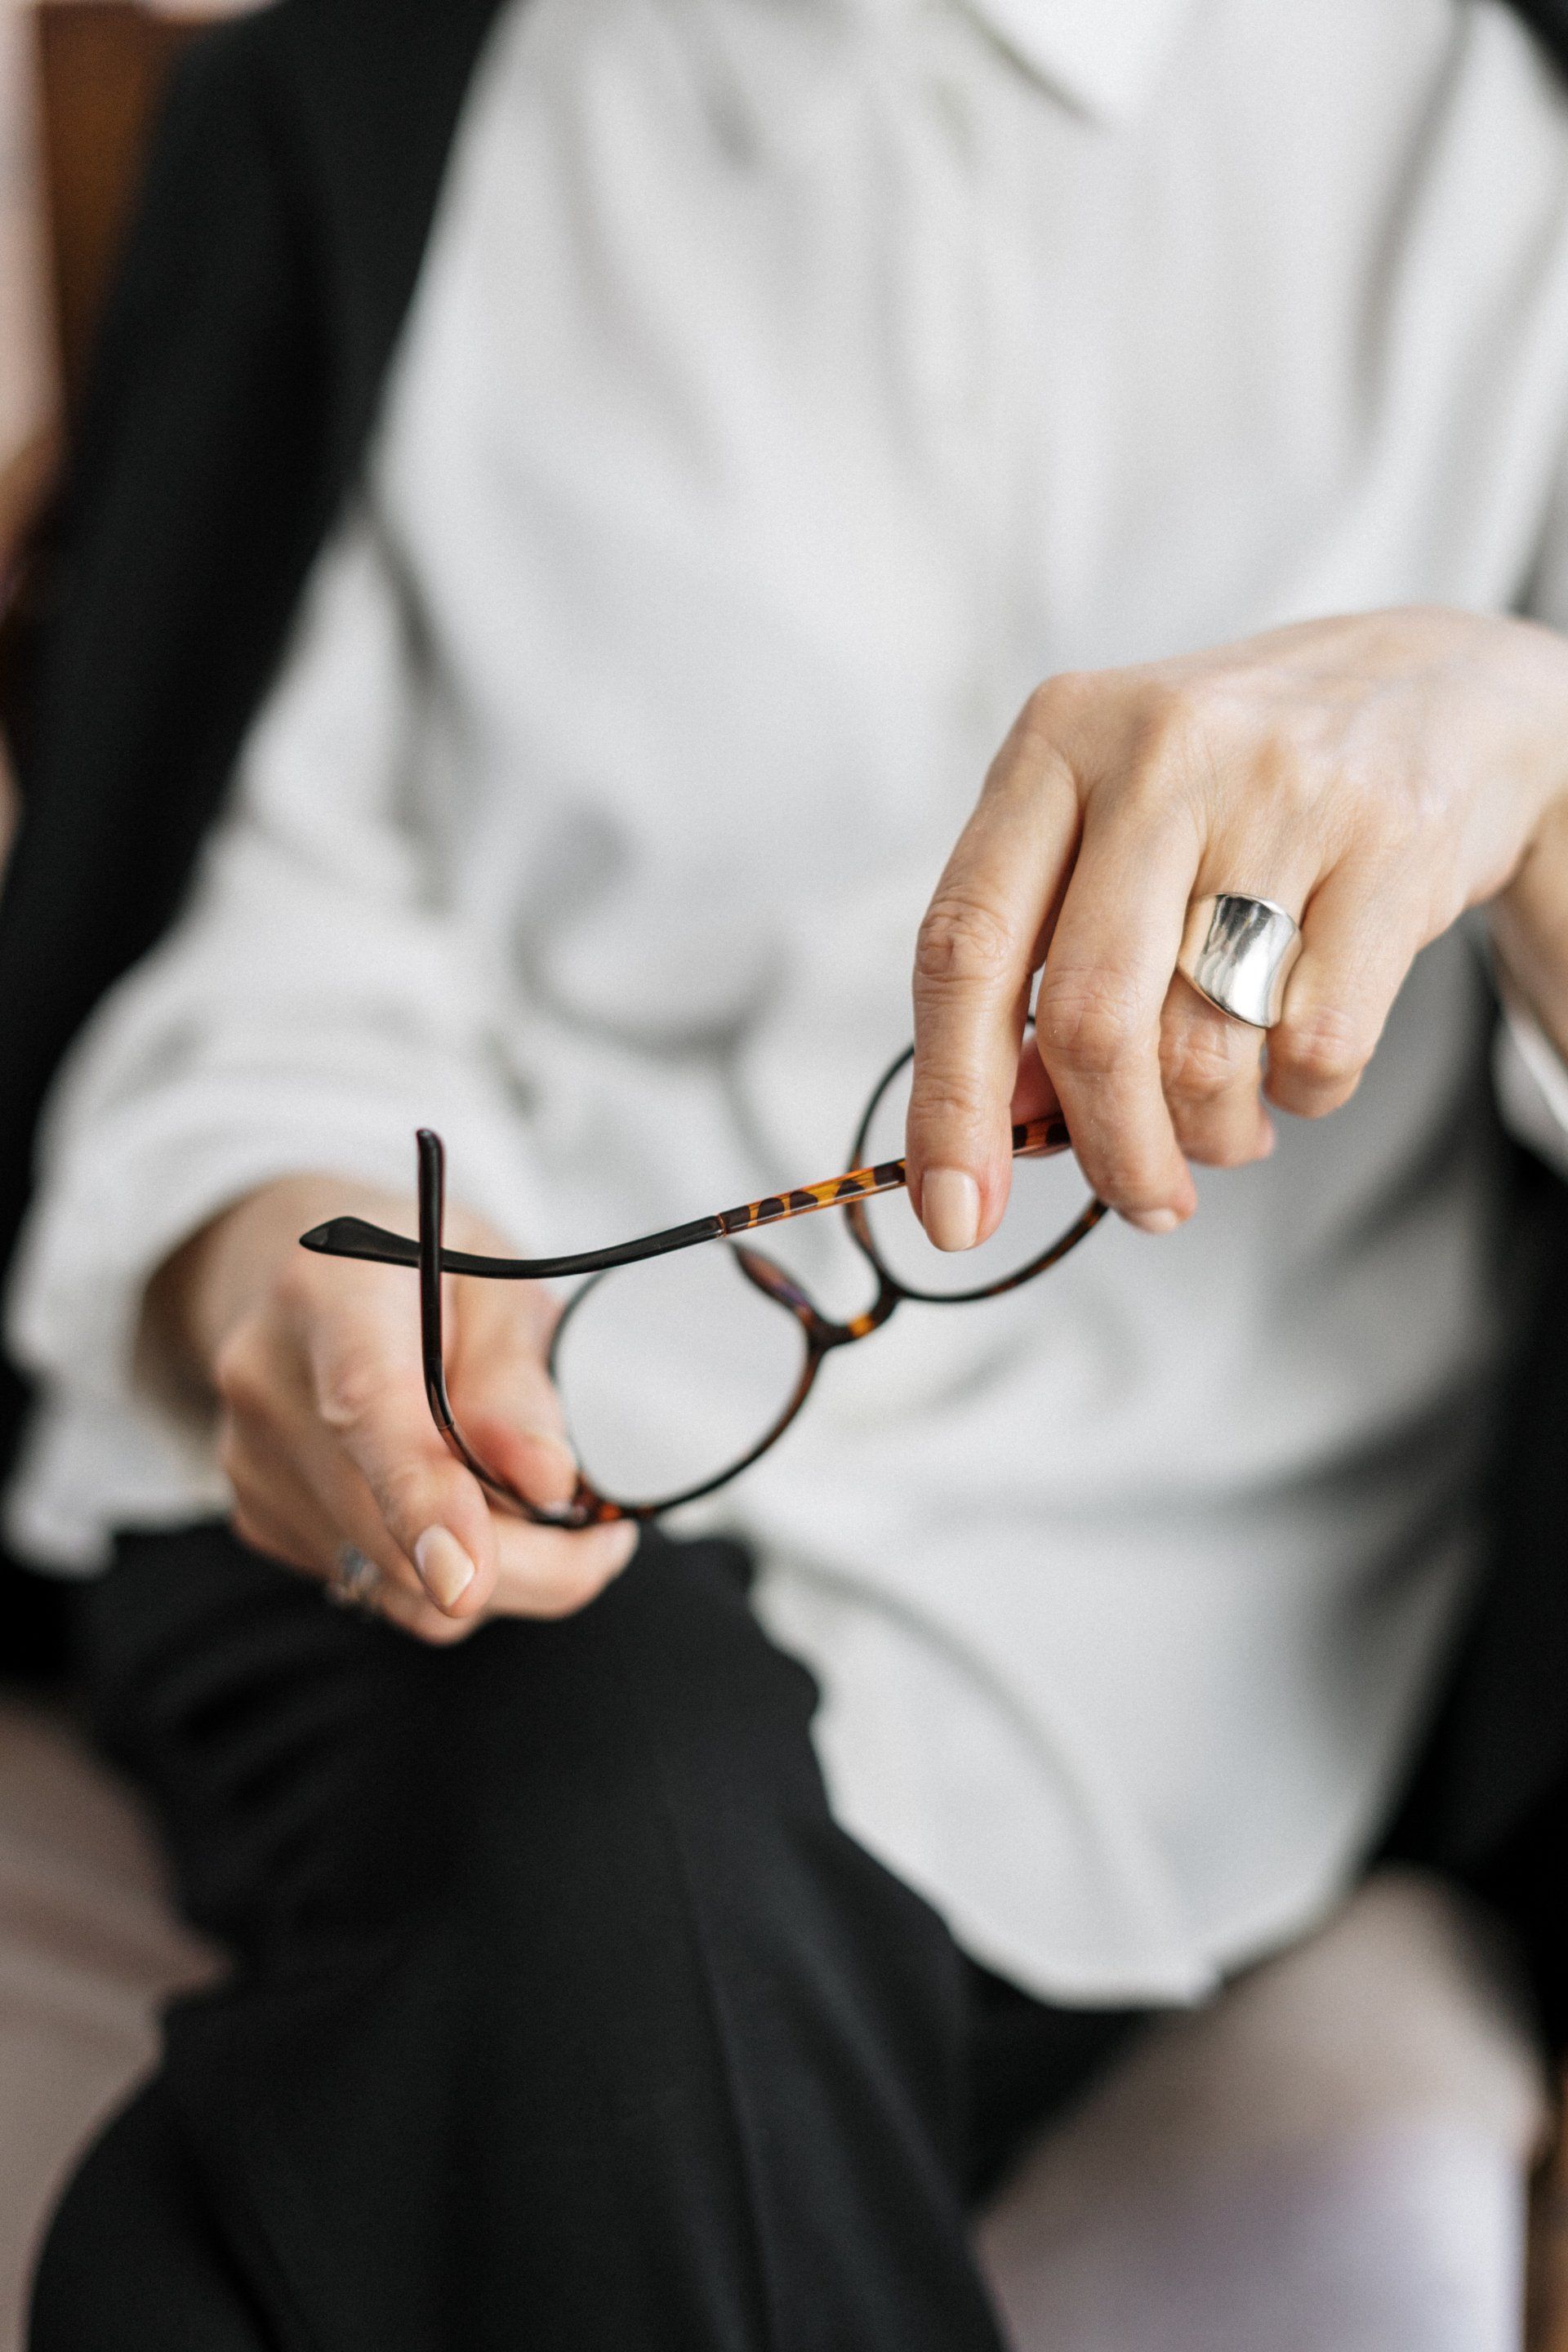 A woman wearing a ring is holding a pair of glasses.